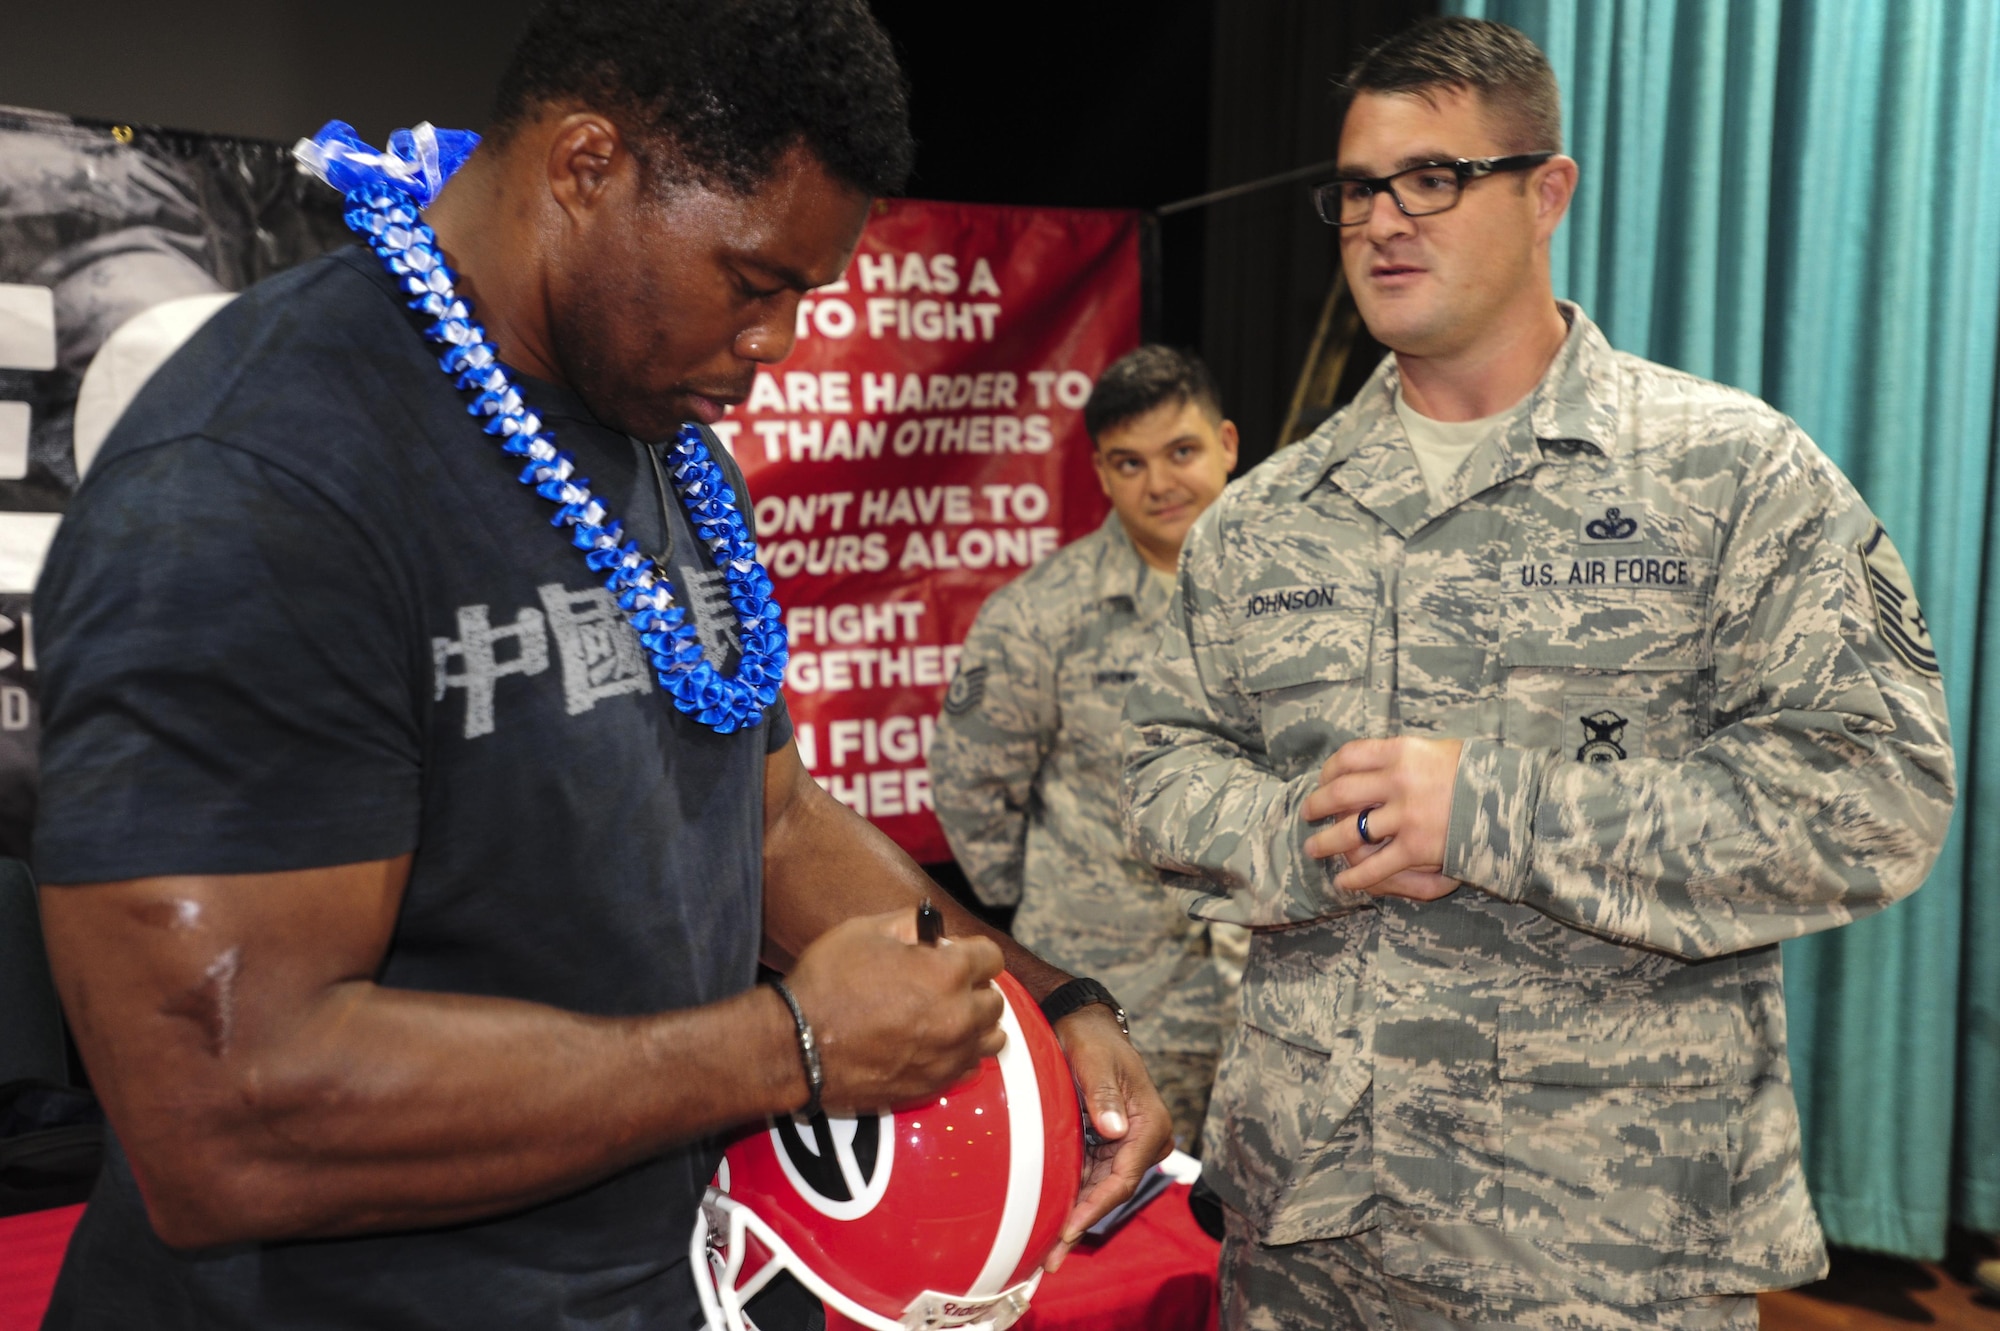 Herschel Walker, former professional football player, signs a football helmet for Master Sgt. Adam Johnson, 647th Security Forces Squadron, after talking with Airmen about the importance of mental health care at the Hickam Memorial Theatre, Joint Base Pearl Harbor-Hickam, Hawaii, Sep. 6, 2017.